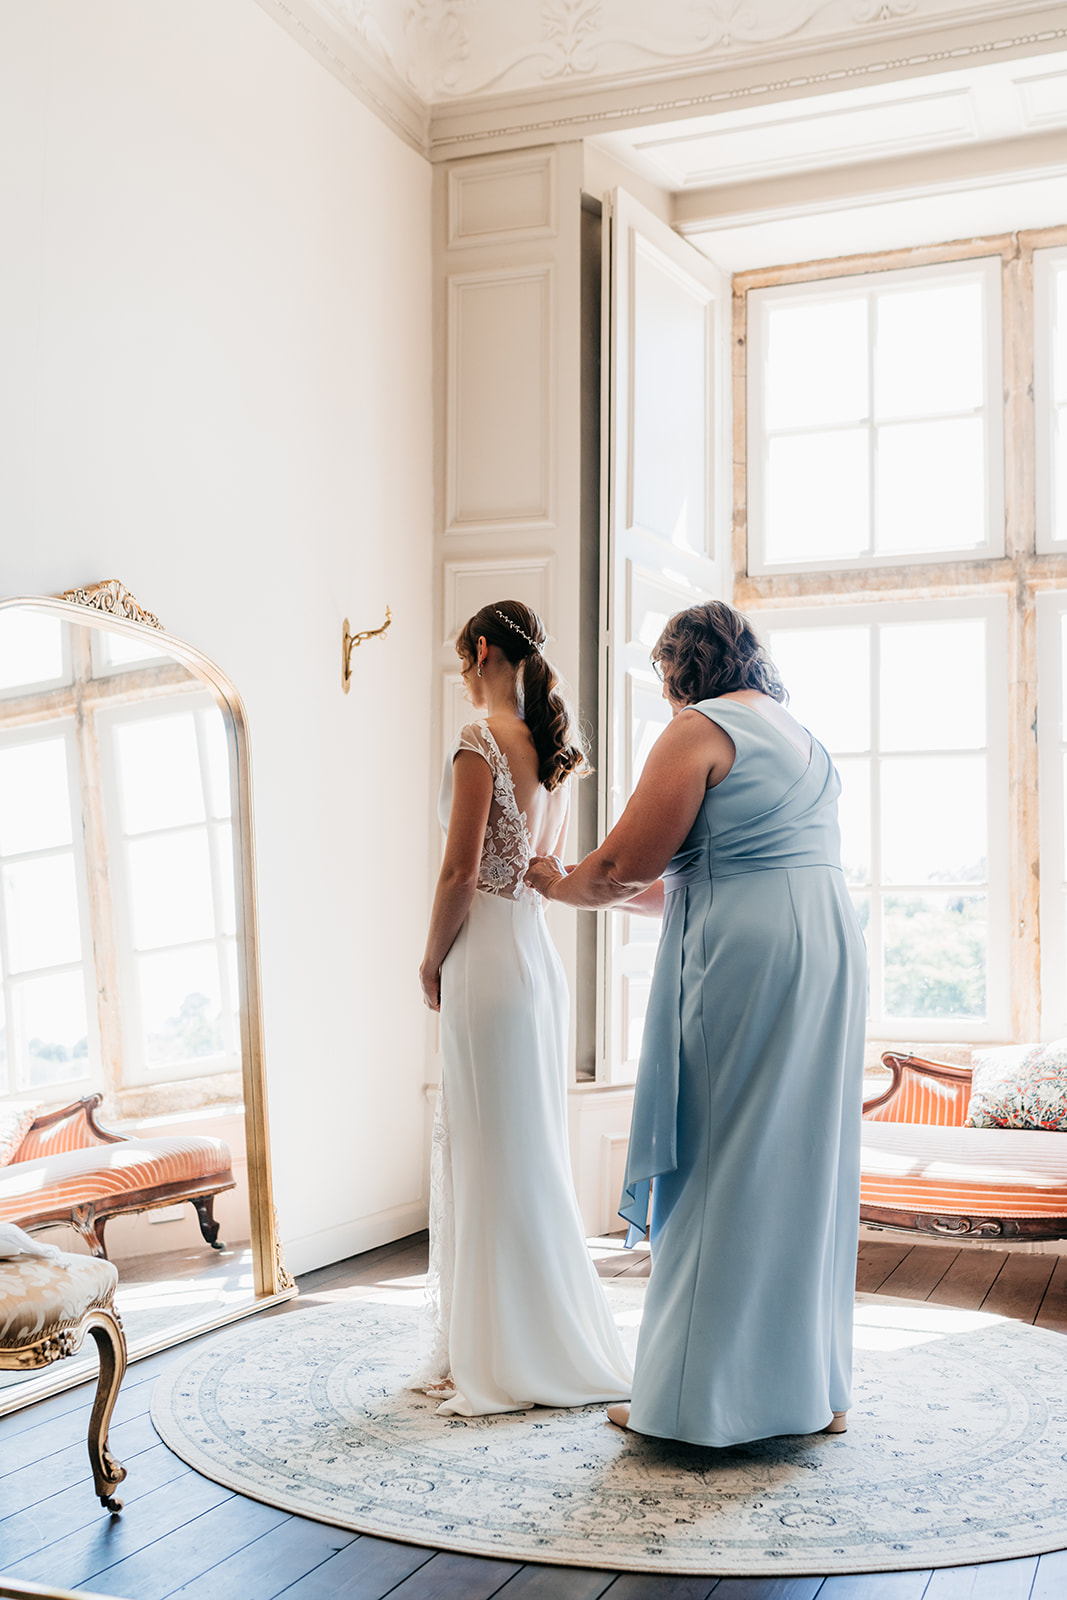 The mother of the bride helping her daughter into her wedding dress